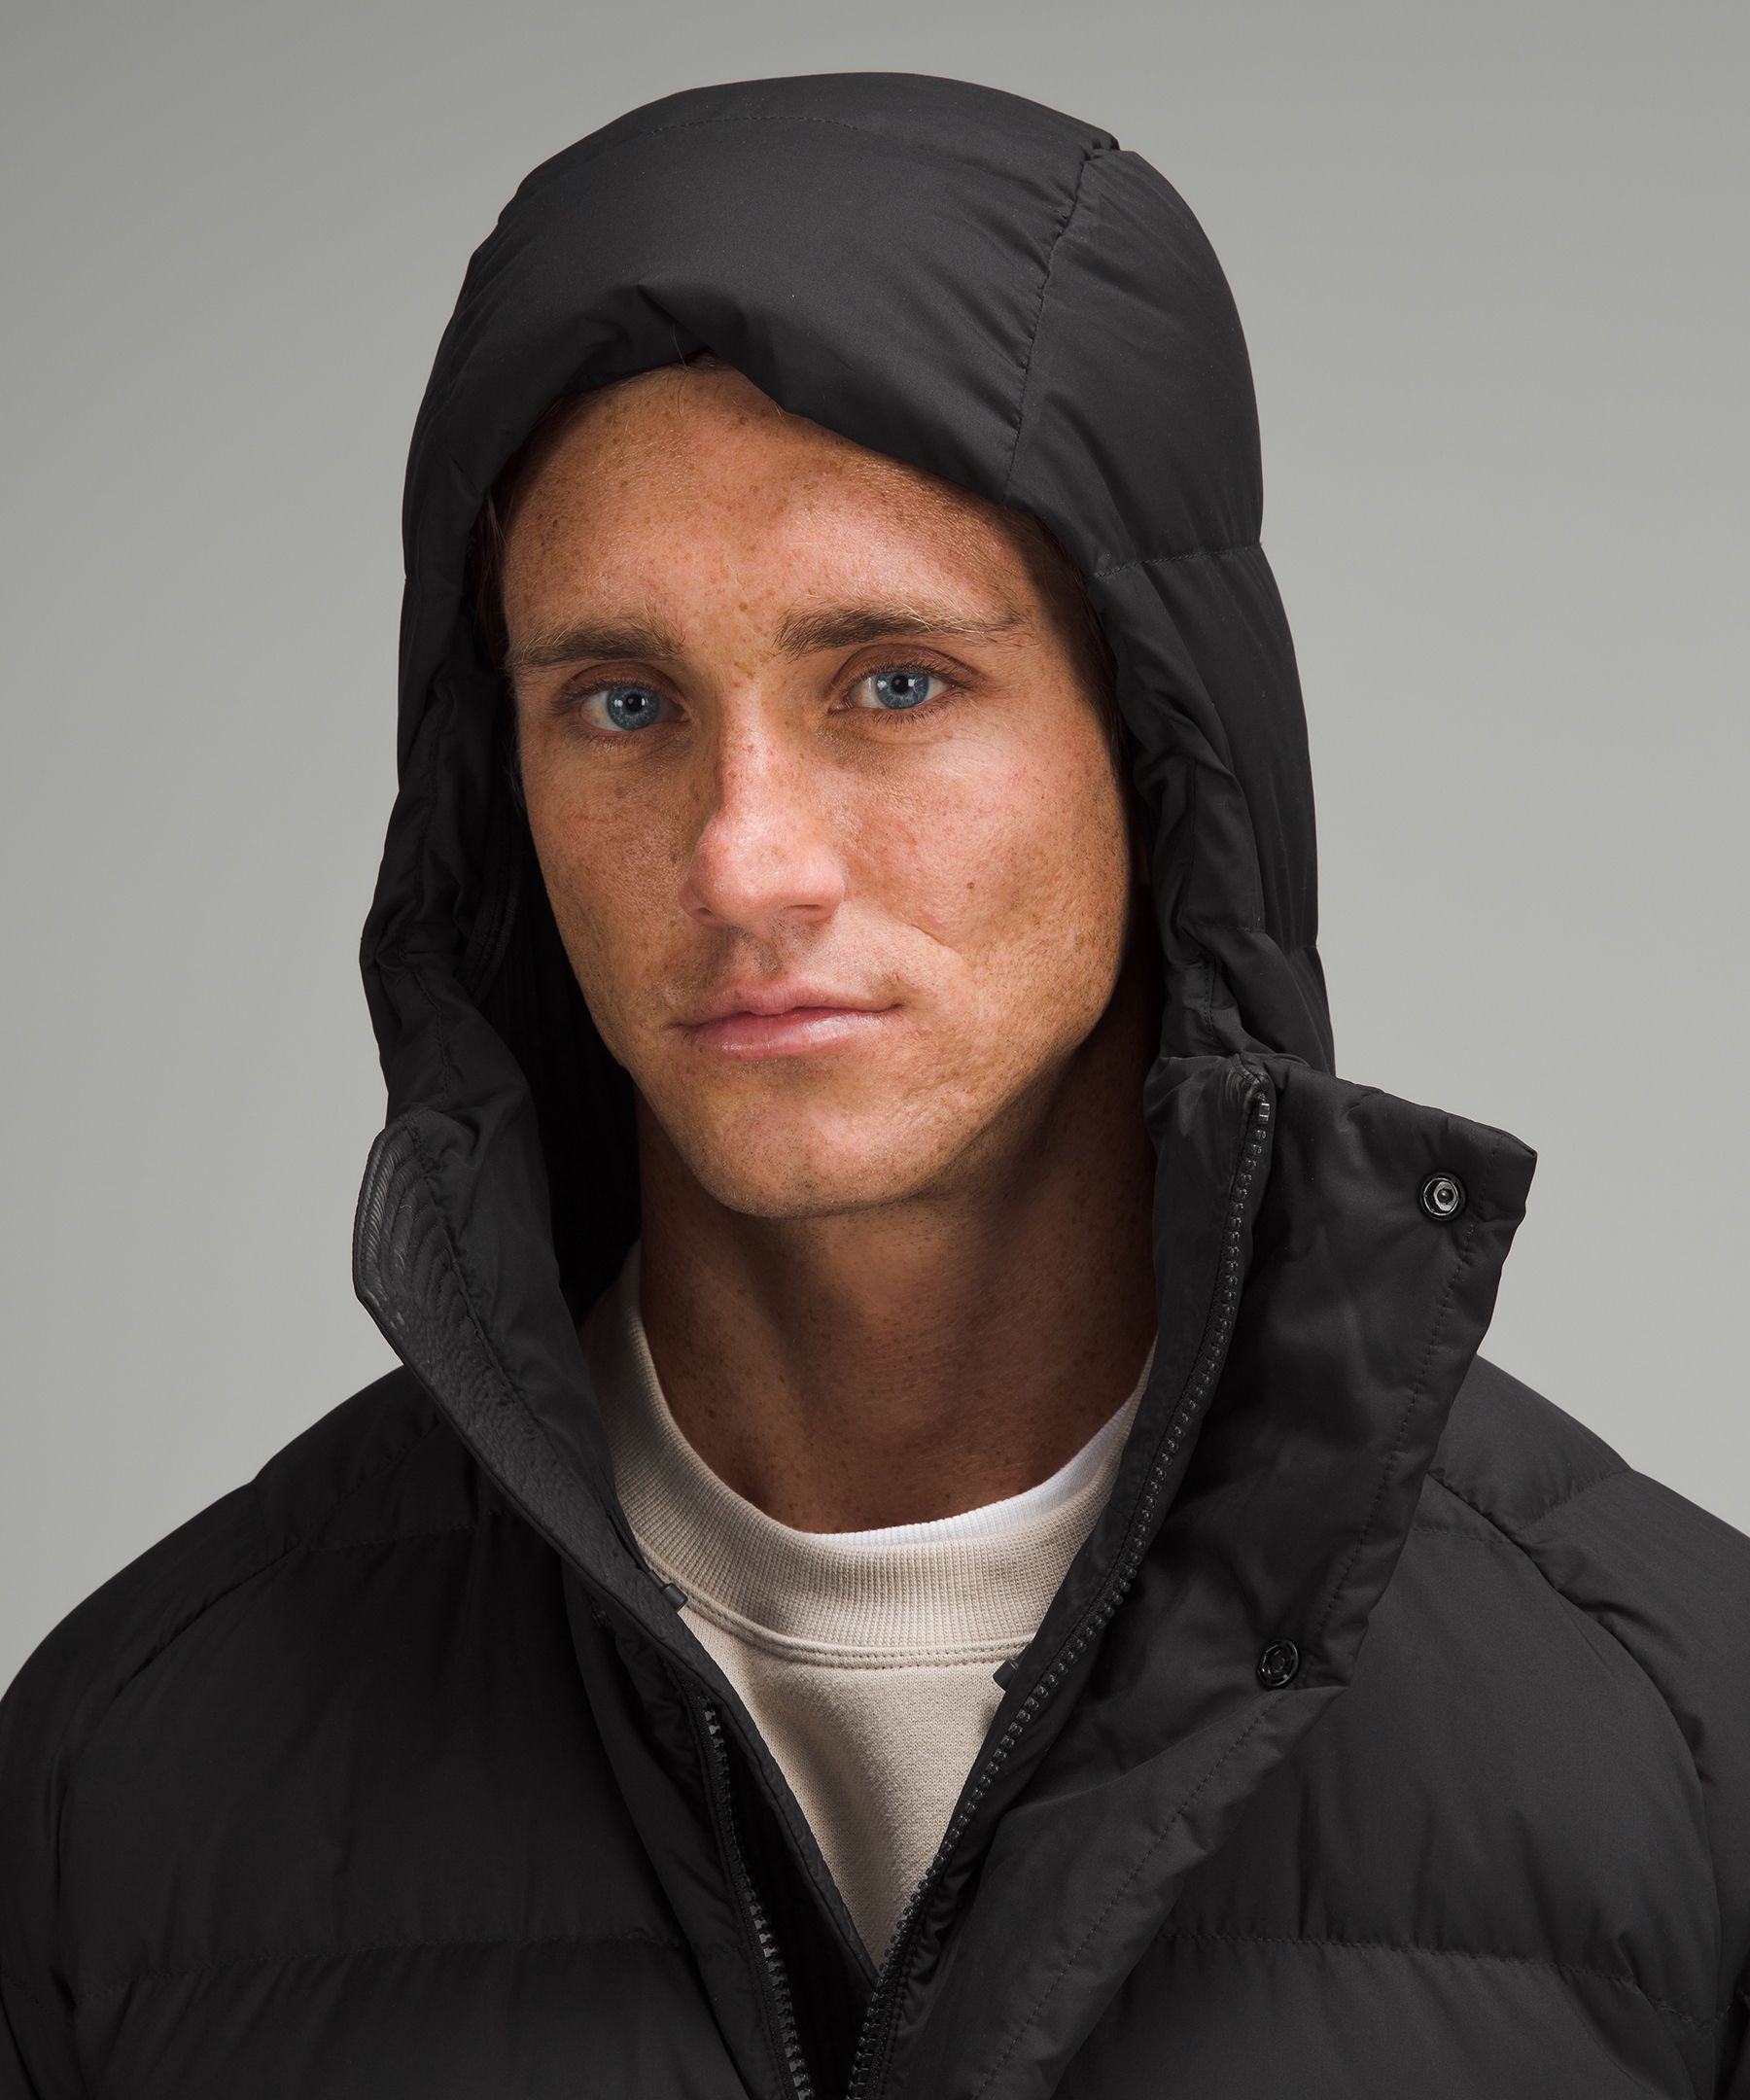 lululemon Will Keep You Warm With This Wunder Puff Jacket - Men's Journal